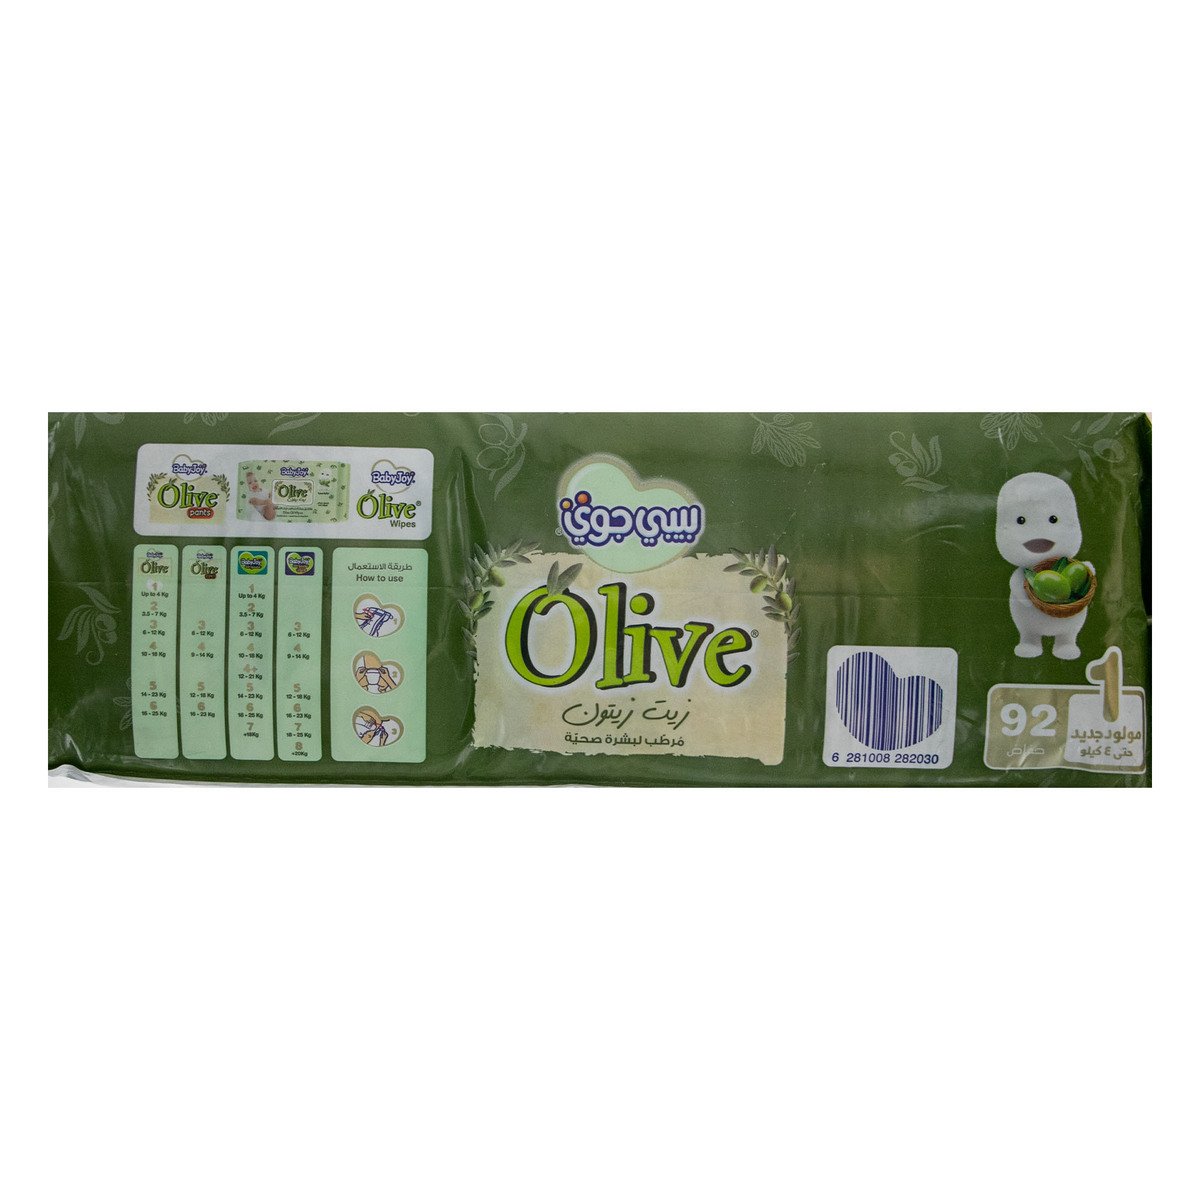 Baby Joy Healthy Skin Olive Diaper Pants Size No.1 Up to 4 kg 92 pcs